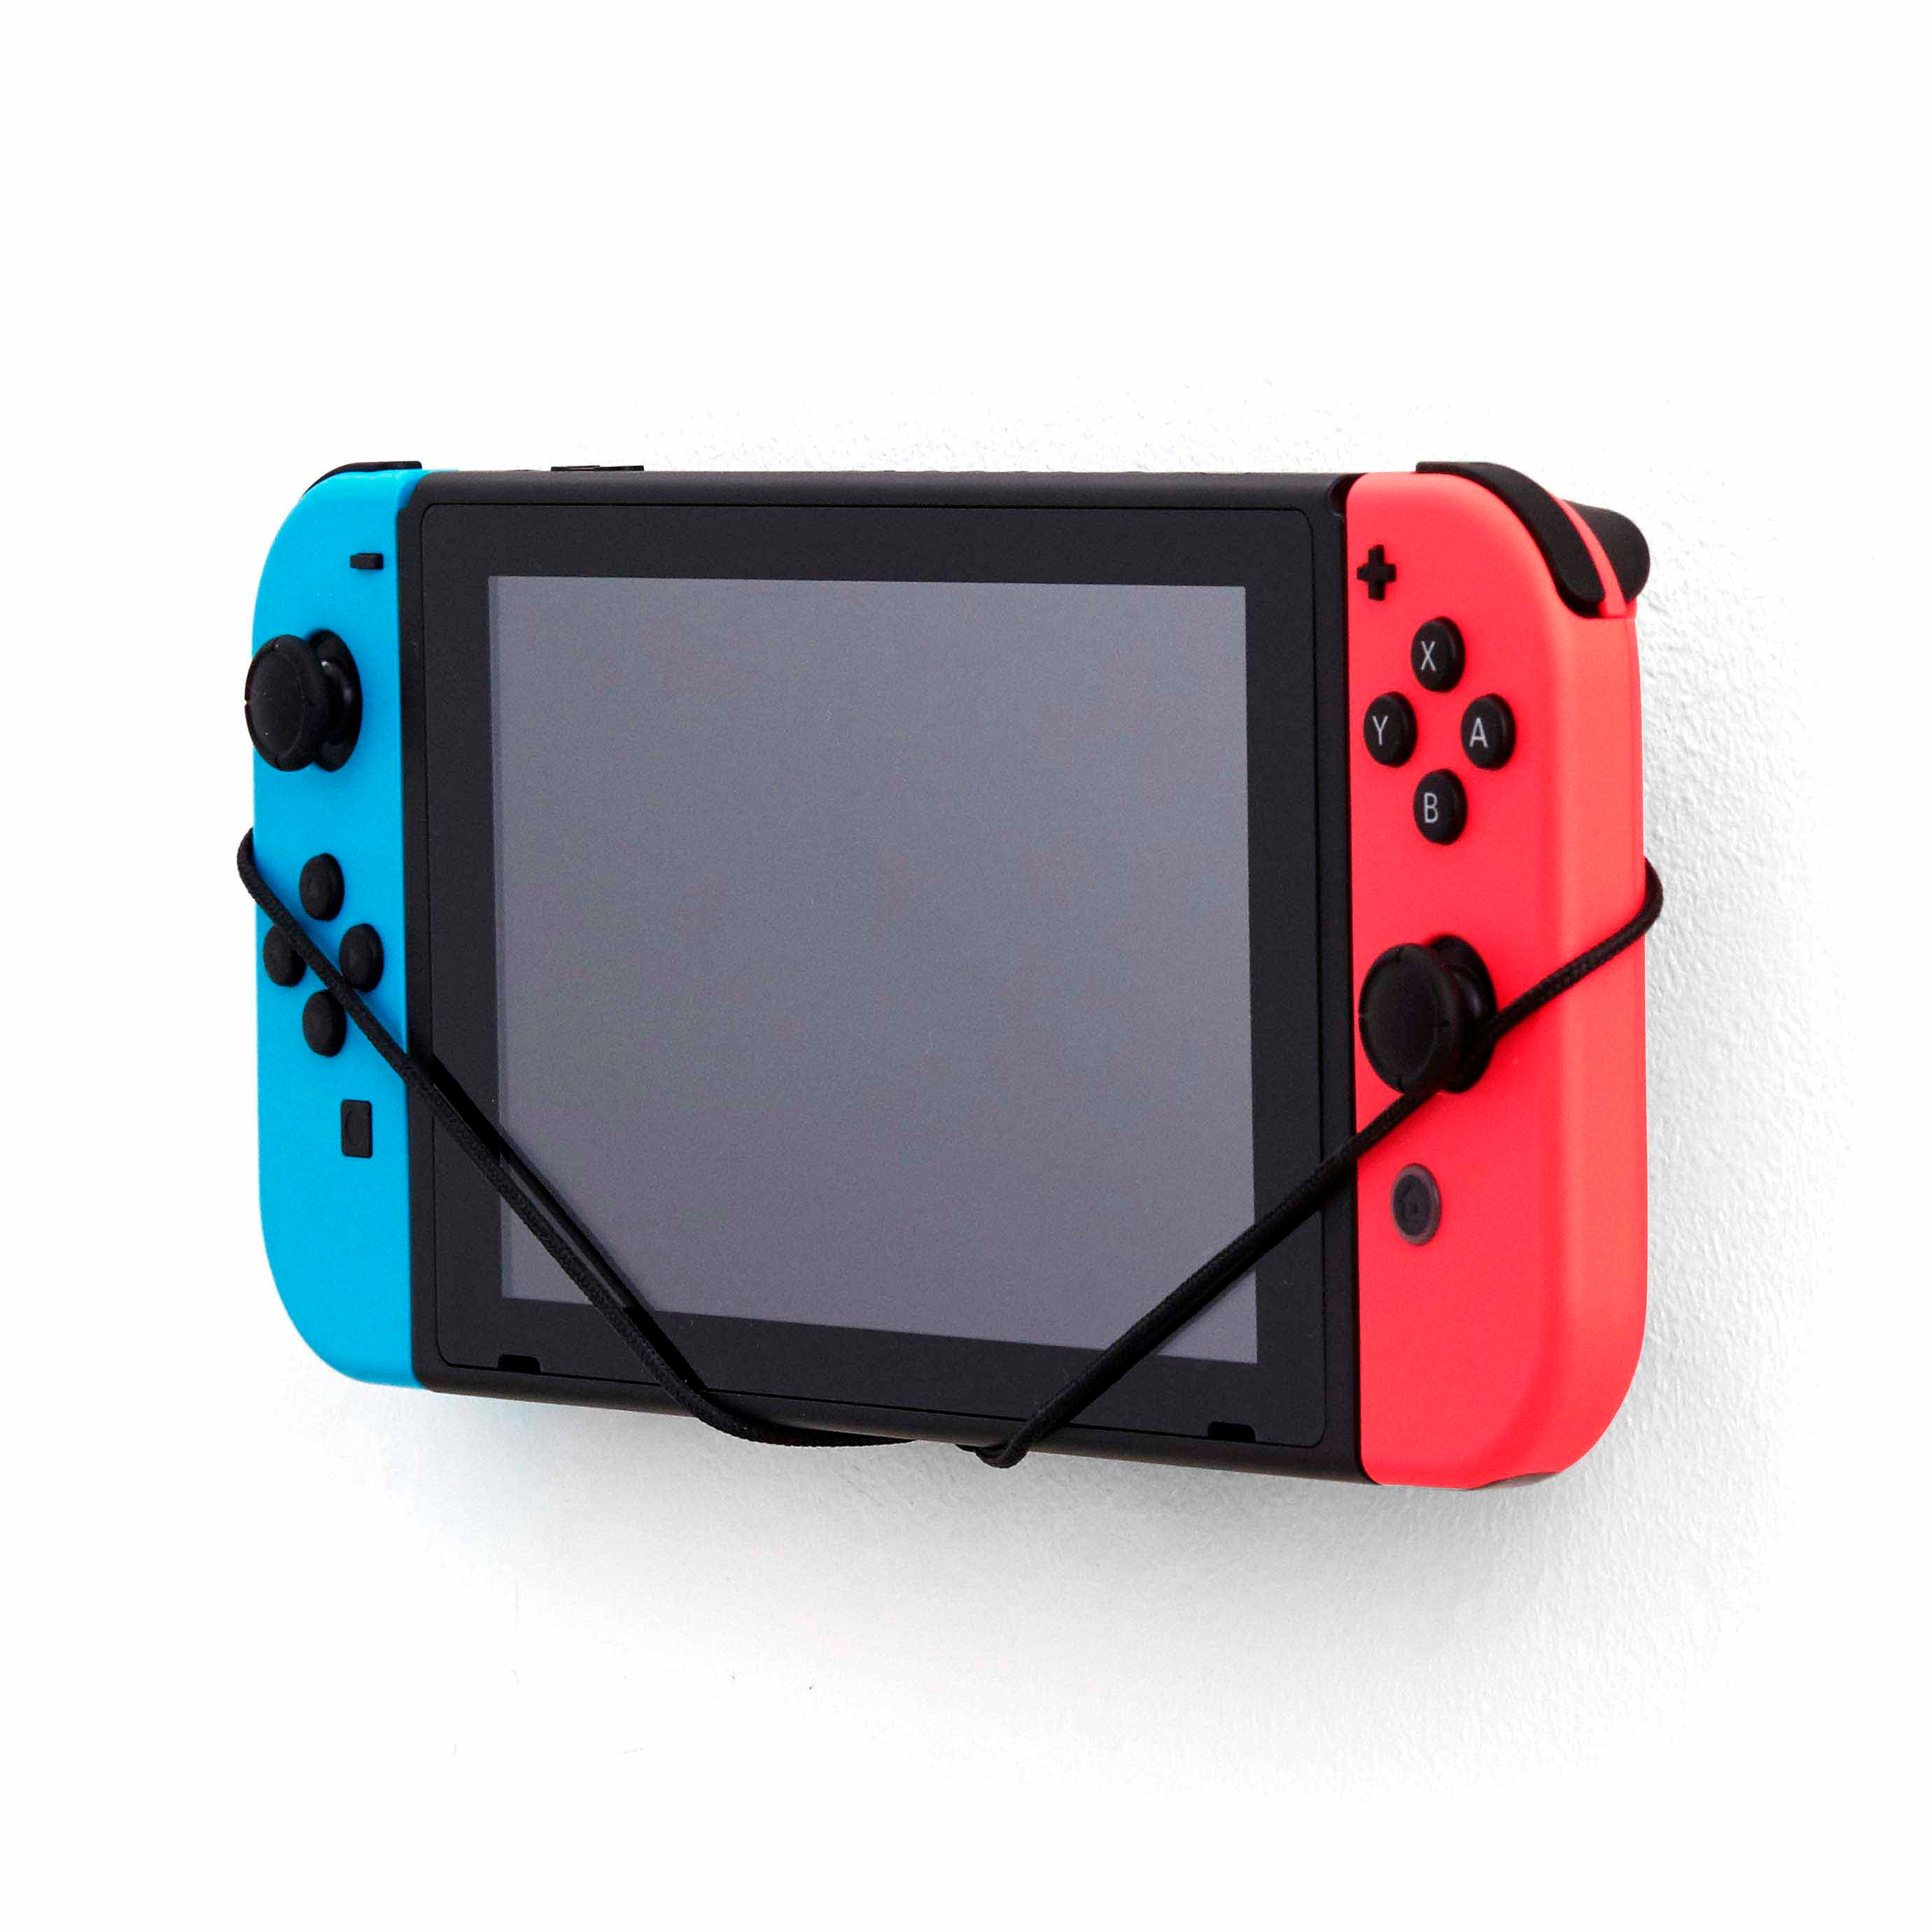 Floating Grip NSW Console Red/Blue Smart Wall Mount